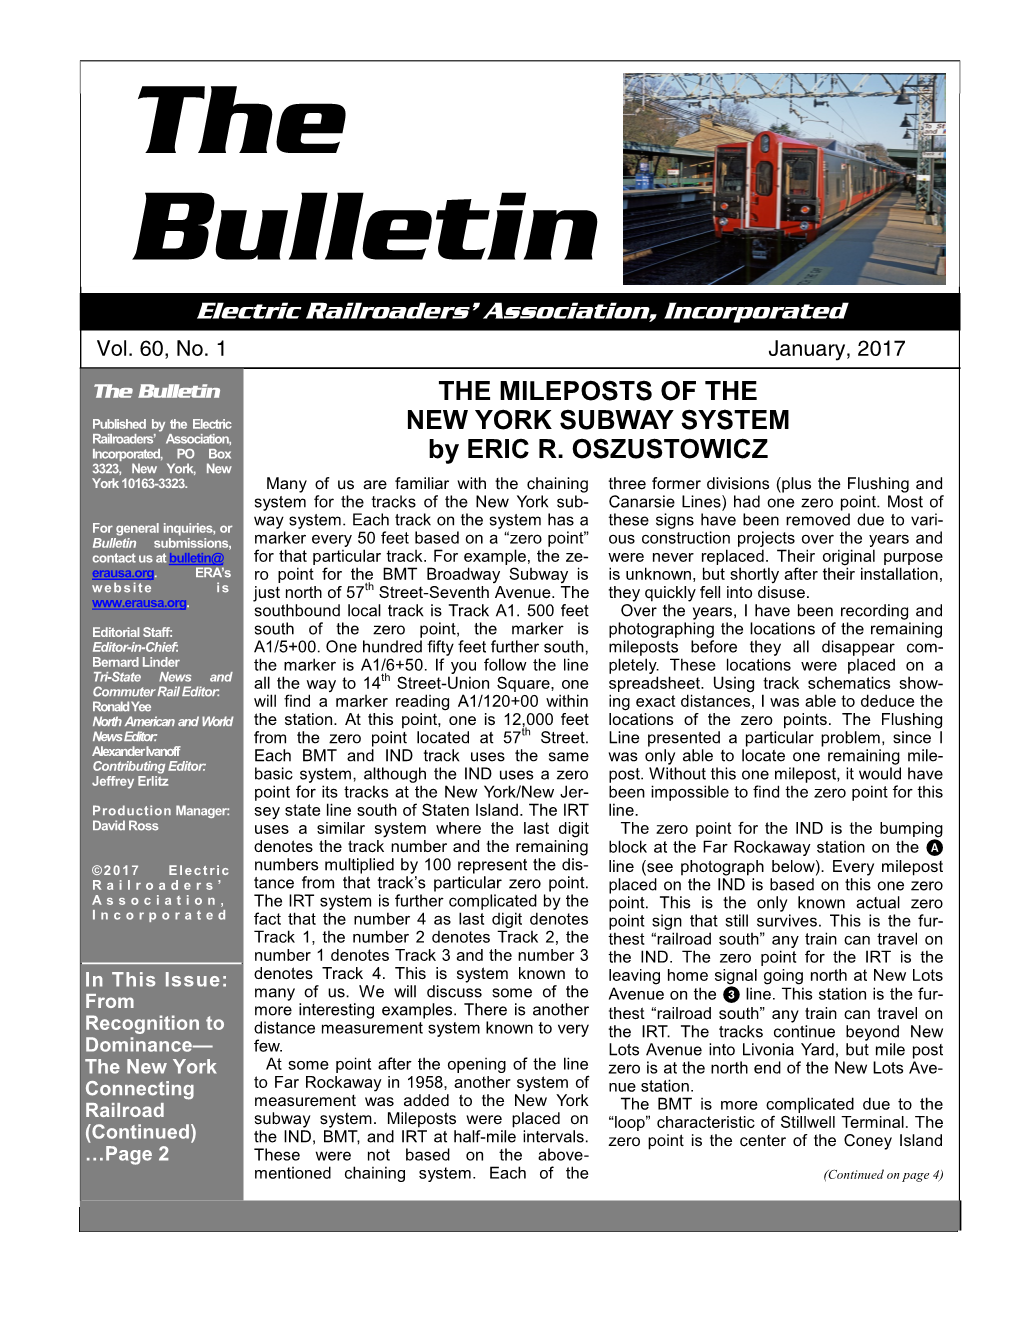 The Bulletin the MILEPOSTS of THE